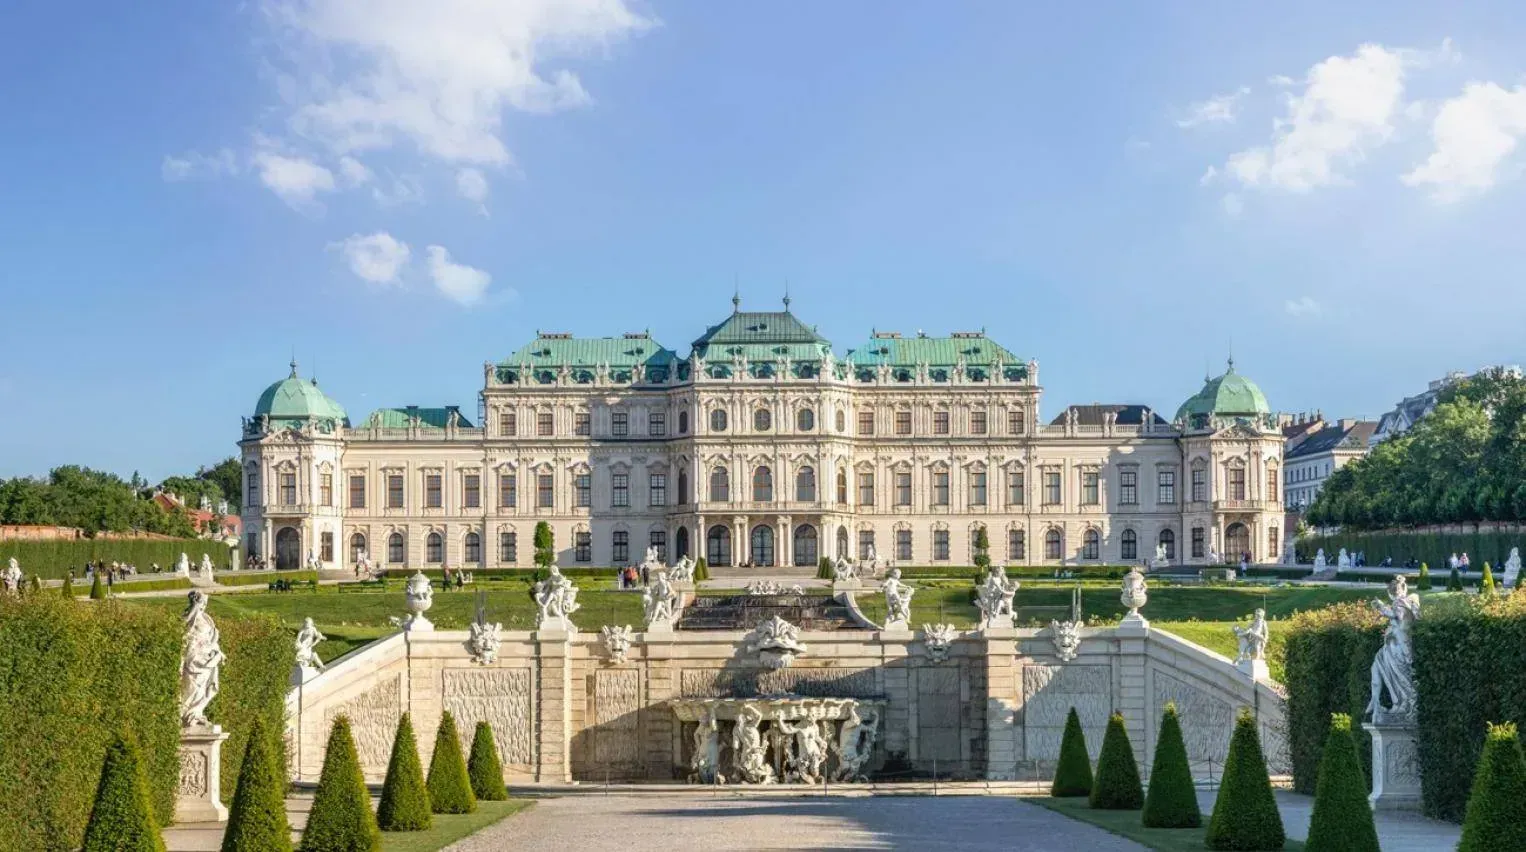 Discovery of Belvedere Palace